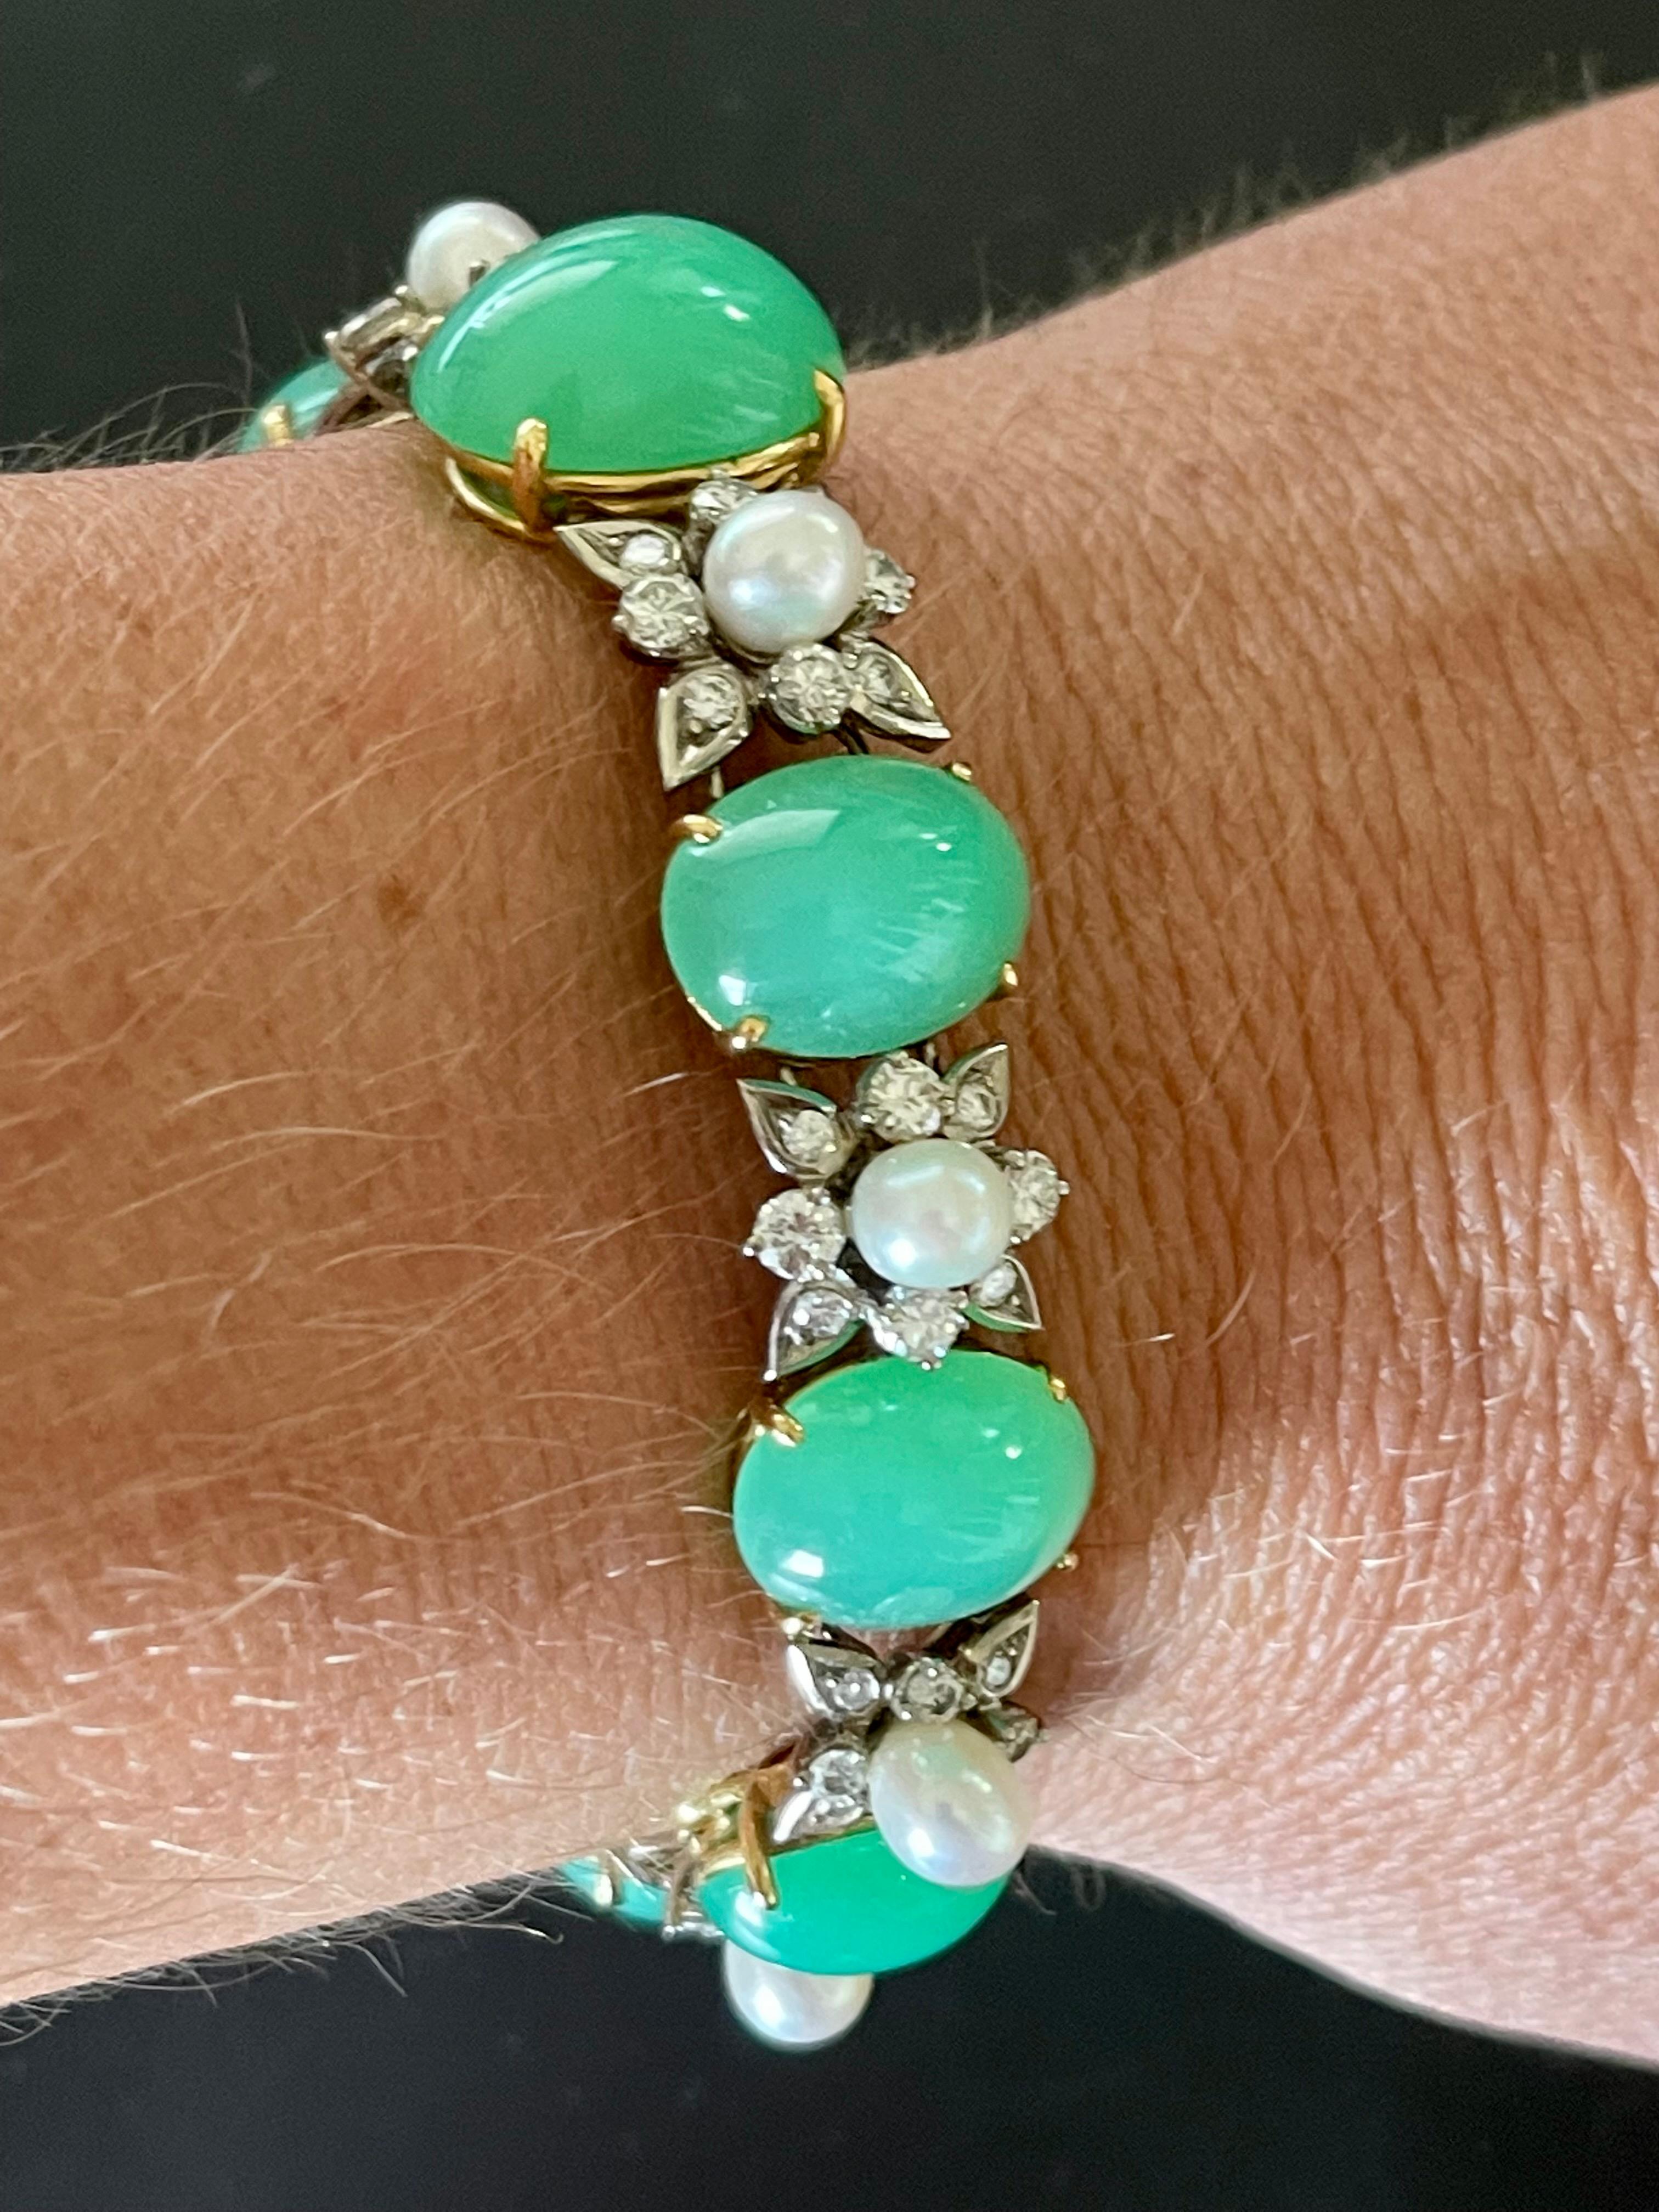 Beautifully crafted white and yellow gold Bracelet, 18 K,  46g.
Elegant bracelet, set with 8 Chrysoprase-Cabochons ca. 59.10 ct, 8 Biwa-Pearls und 64 brilliant cut diamonds of approximately 4.40 ct, G color, vs 1. Length 18 cm. 
